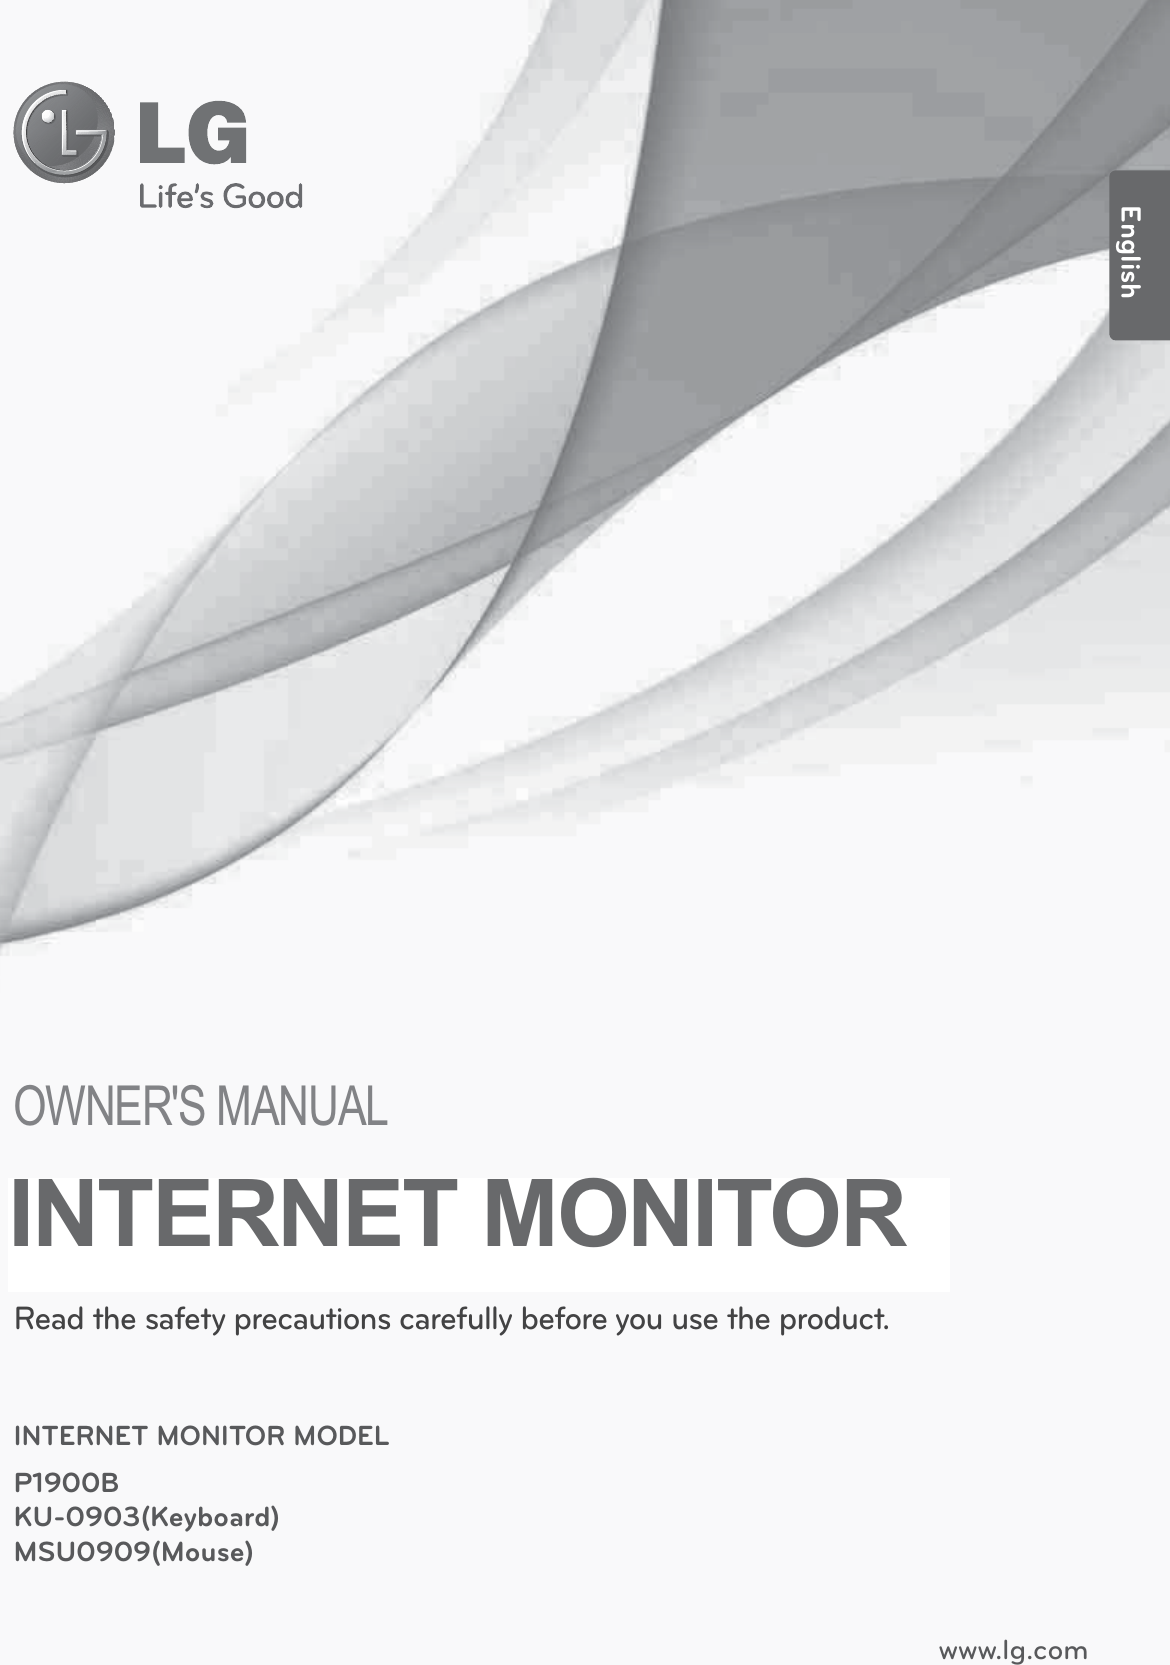 www.lg.com2:1(560$18$/Read the safety precautions carefully before you use the product.INTERNET MONITOR MODELP1900BKU-0903(Keyboard)MSU0909(Mouse)English